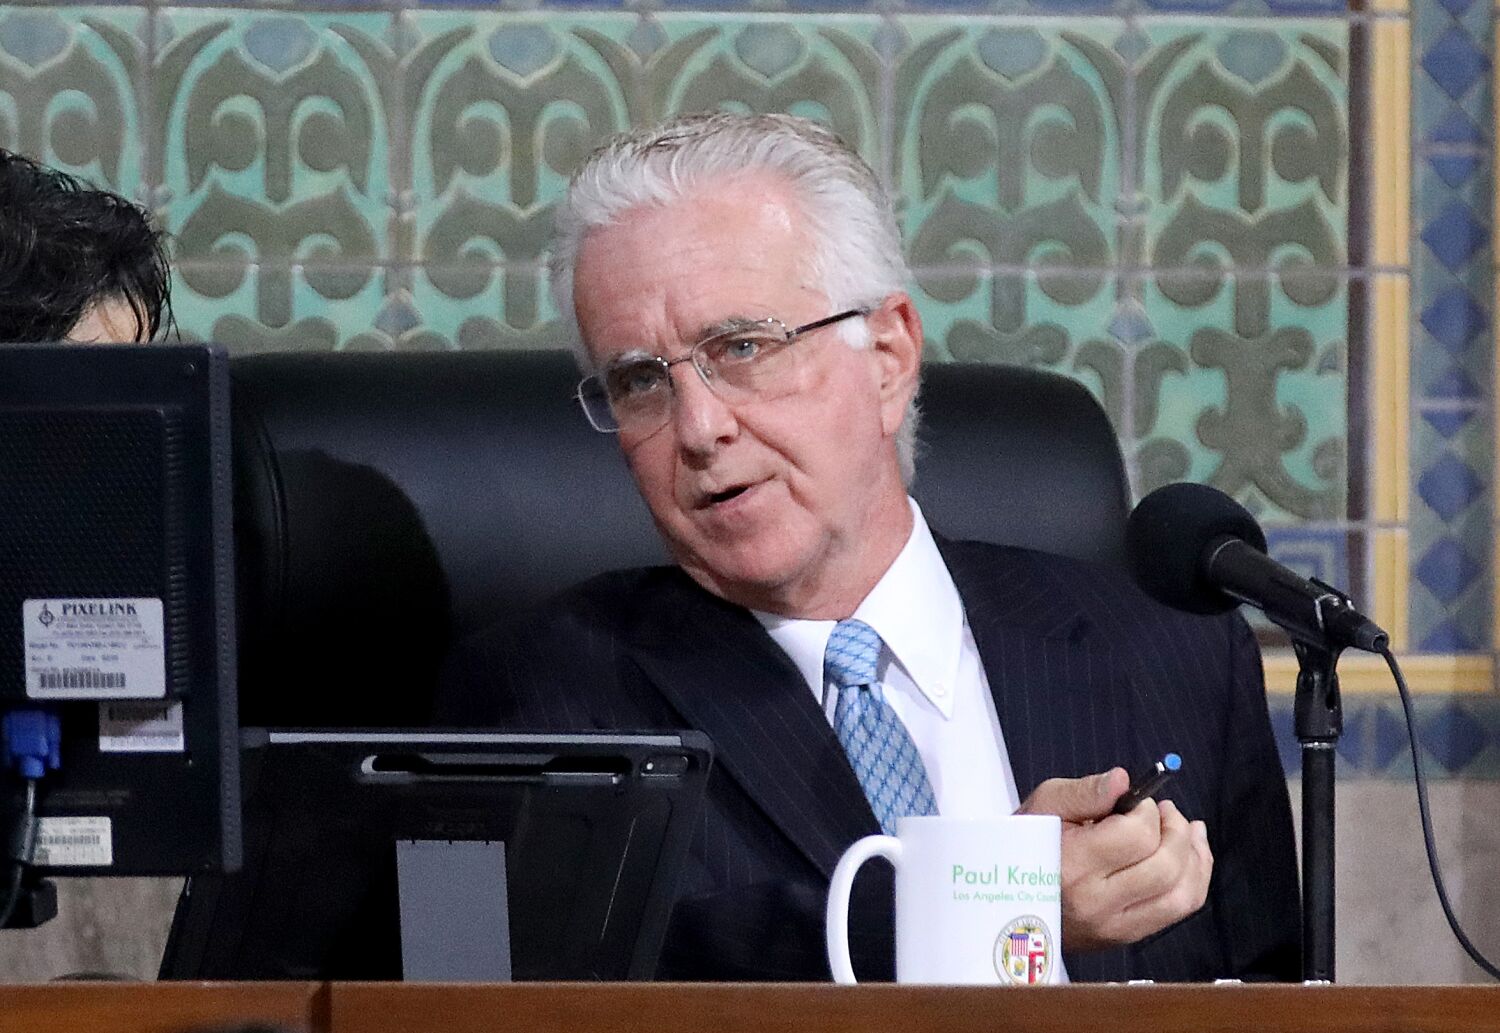 L.A. Council President Paul Krekorian won't join the crowded race to replace Schiff